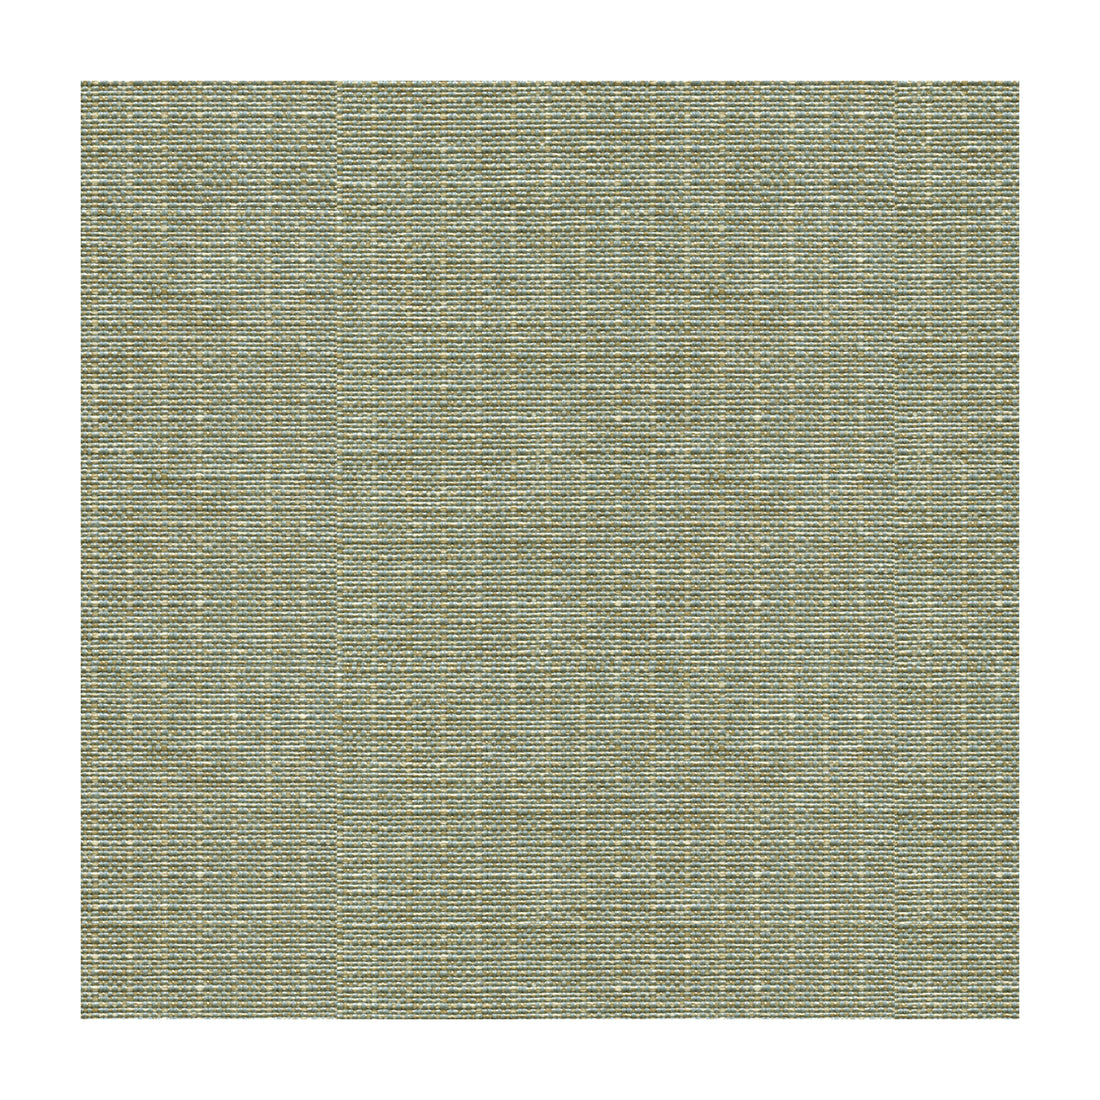 Shipshape fabric in mist color - pattern 33501.1516.0 - by Kravet Design in the Waterworks II collection